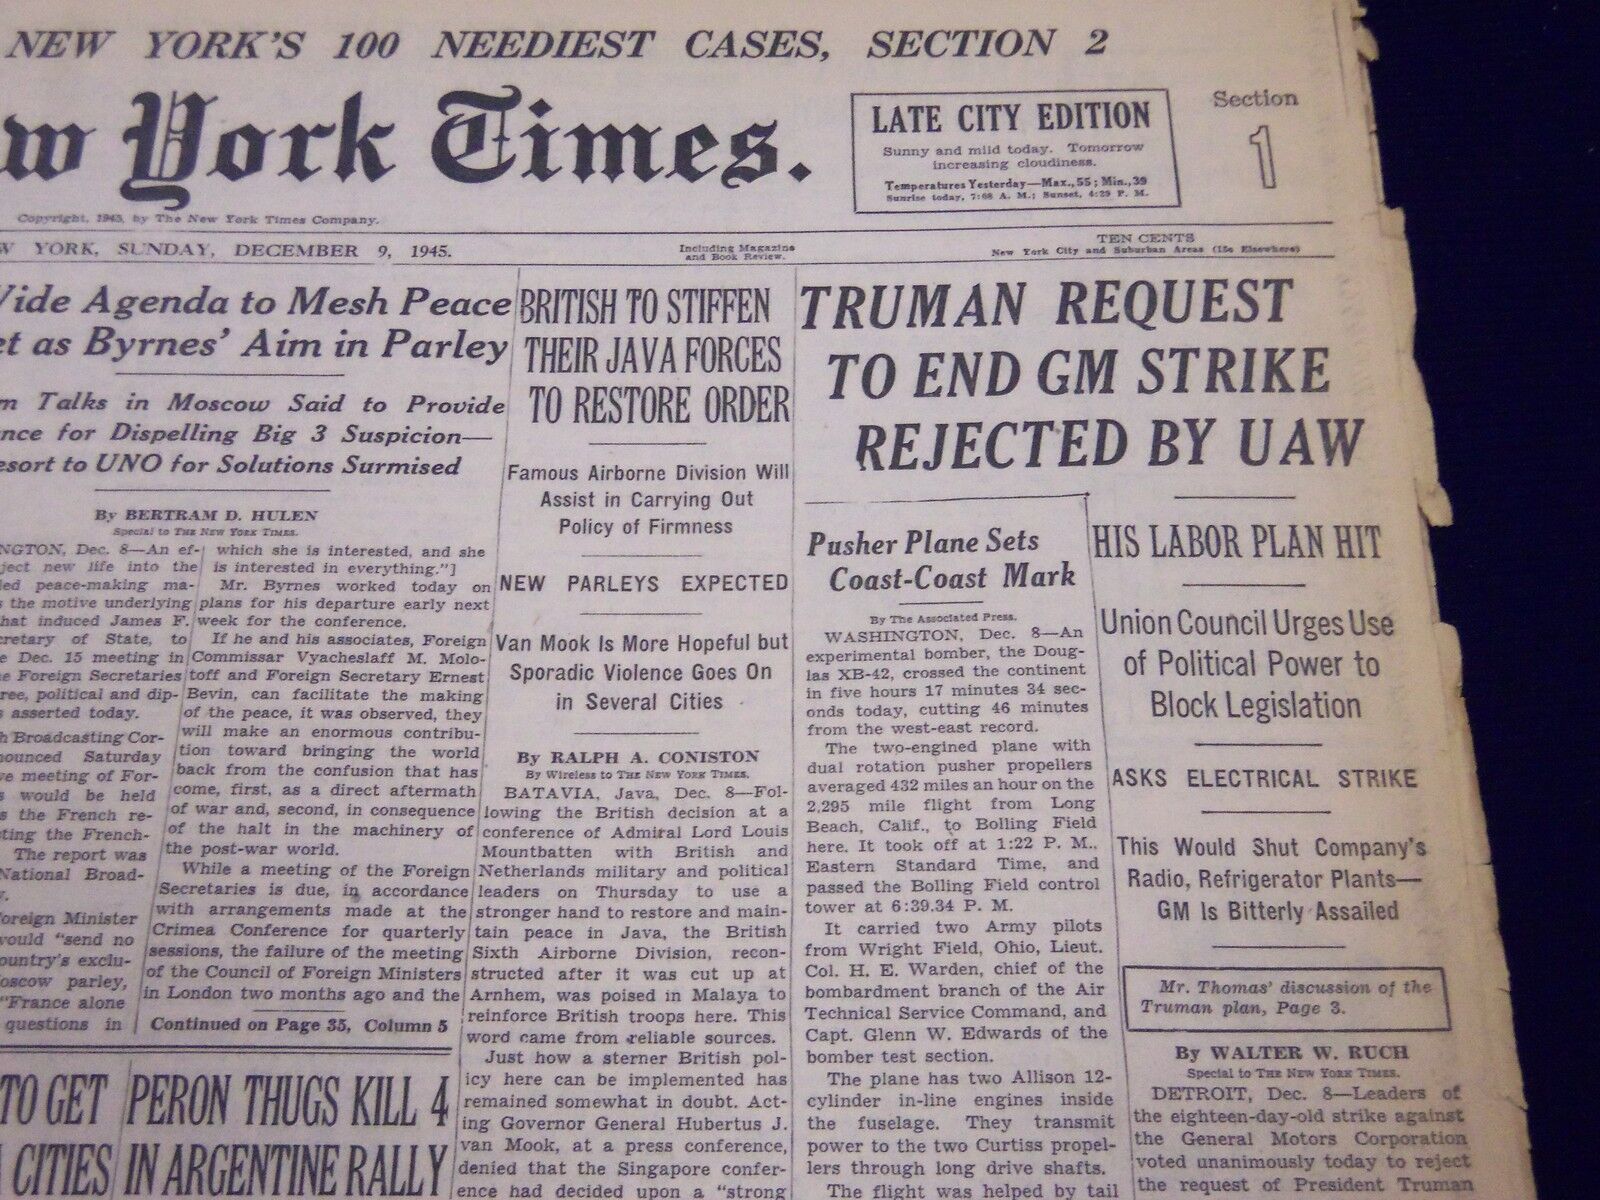 1945 DEC 9 NEW YORK TIMES - TRUMAN REQUEST TO END GM STRIKE REJECTED - NT 267